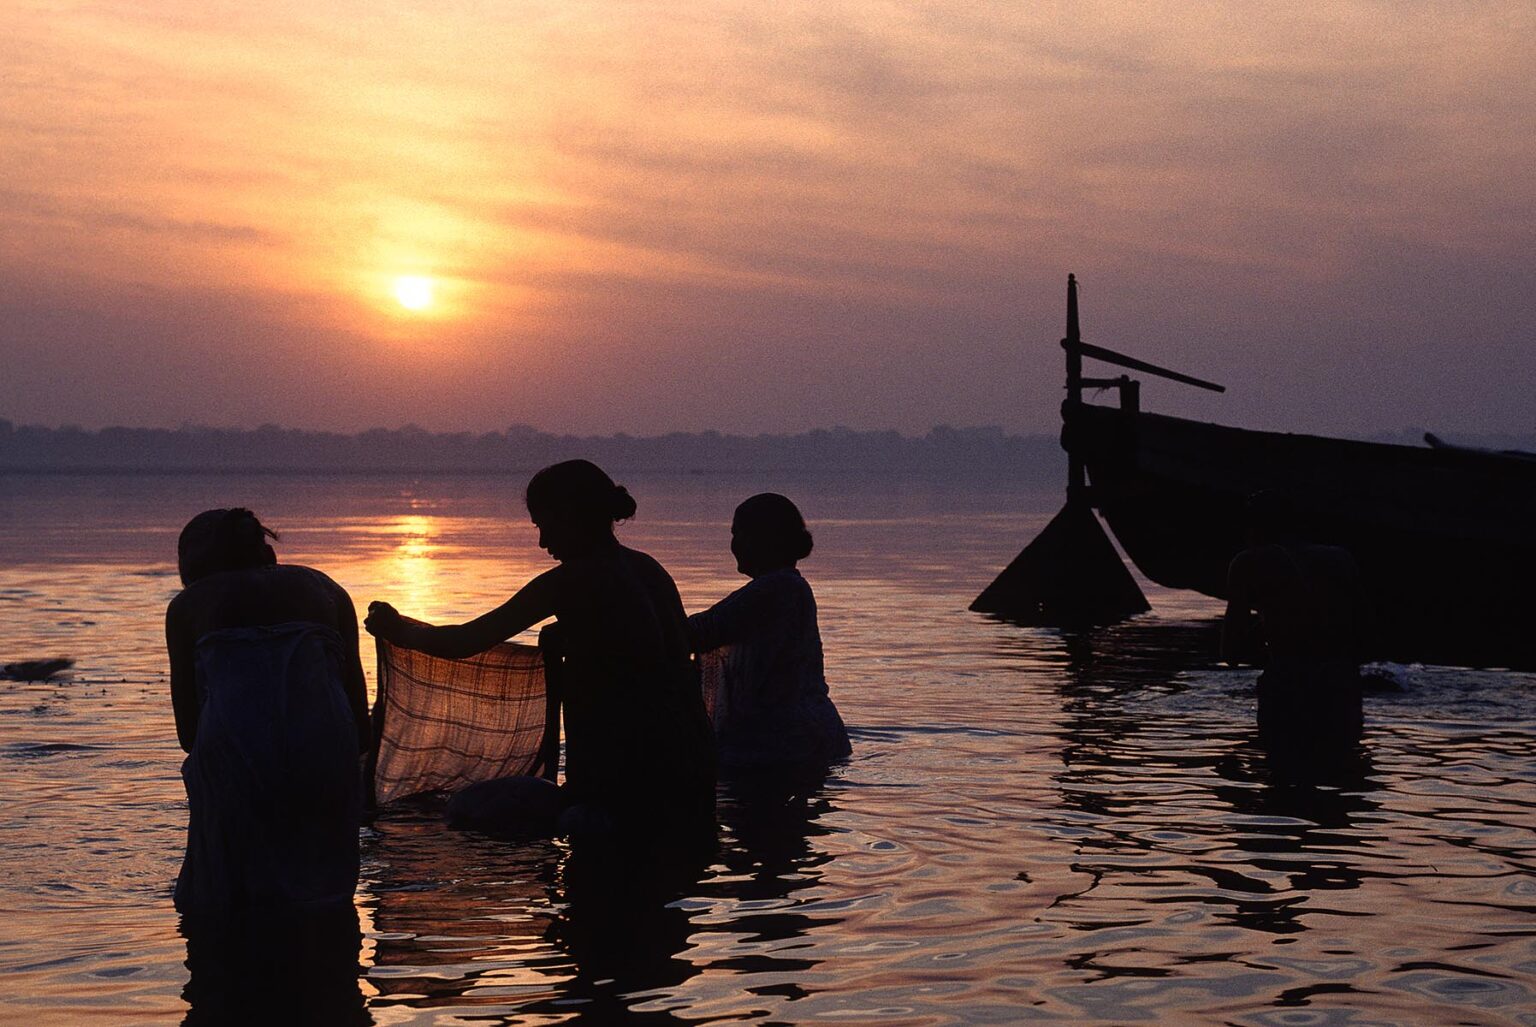 Faithful HINDU WOMEN wash clothes and perform ablutions in the GANGES RIVER at SUNRISE - VARANASI (BENARES), INDIA